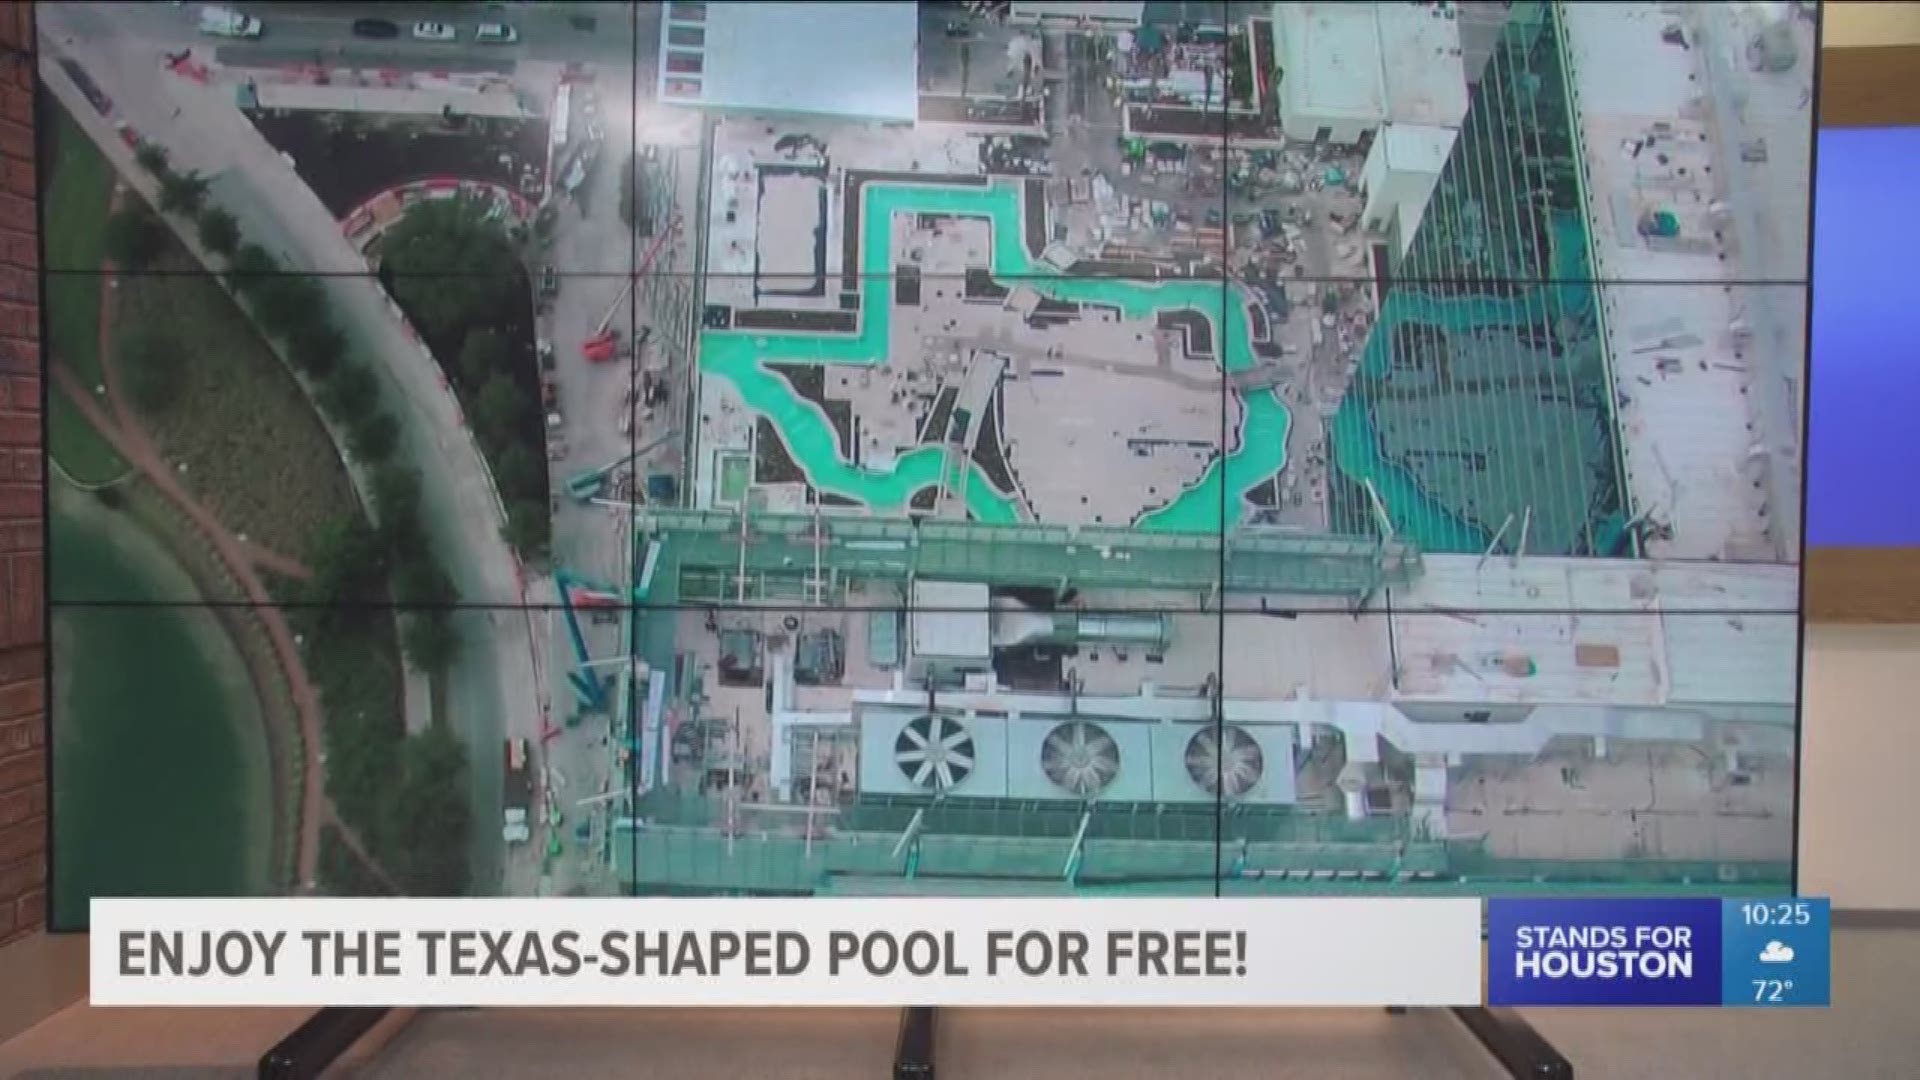 The Marriott Marquis is offering three chances for people to take part in a free party at its Texas-shaped pool.